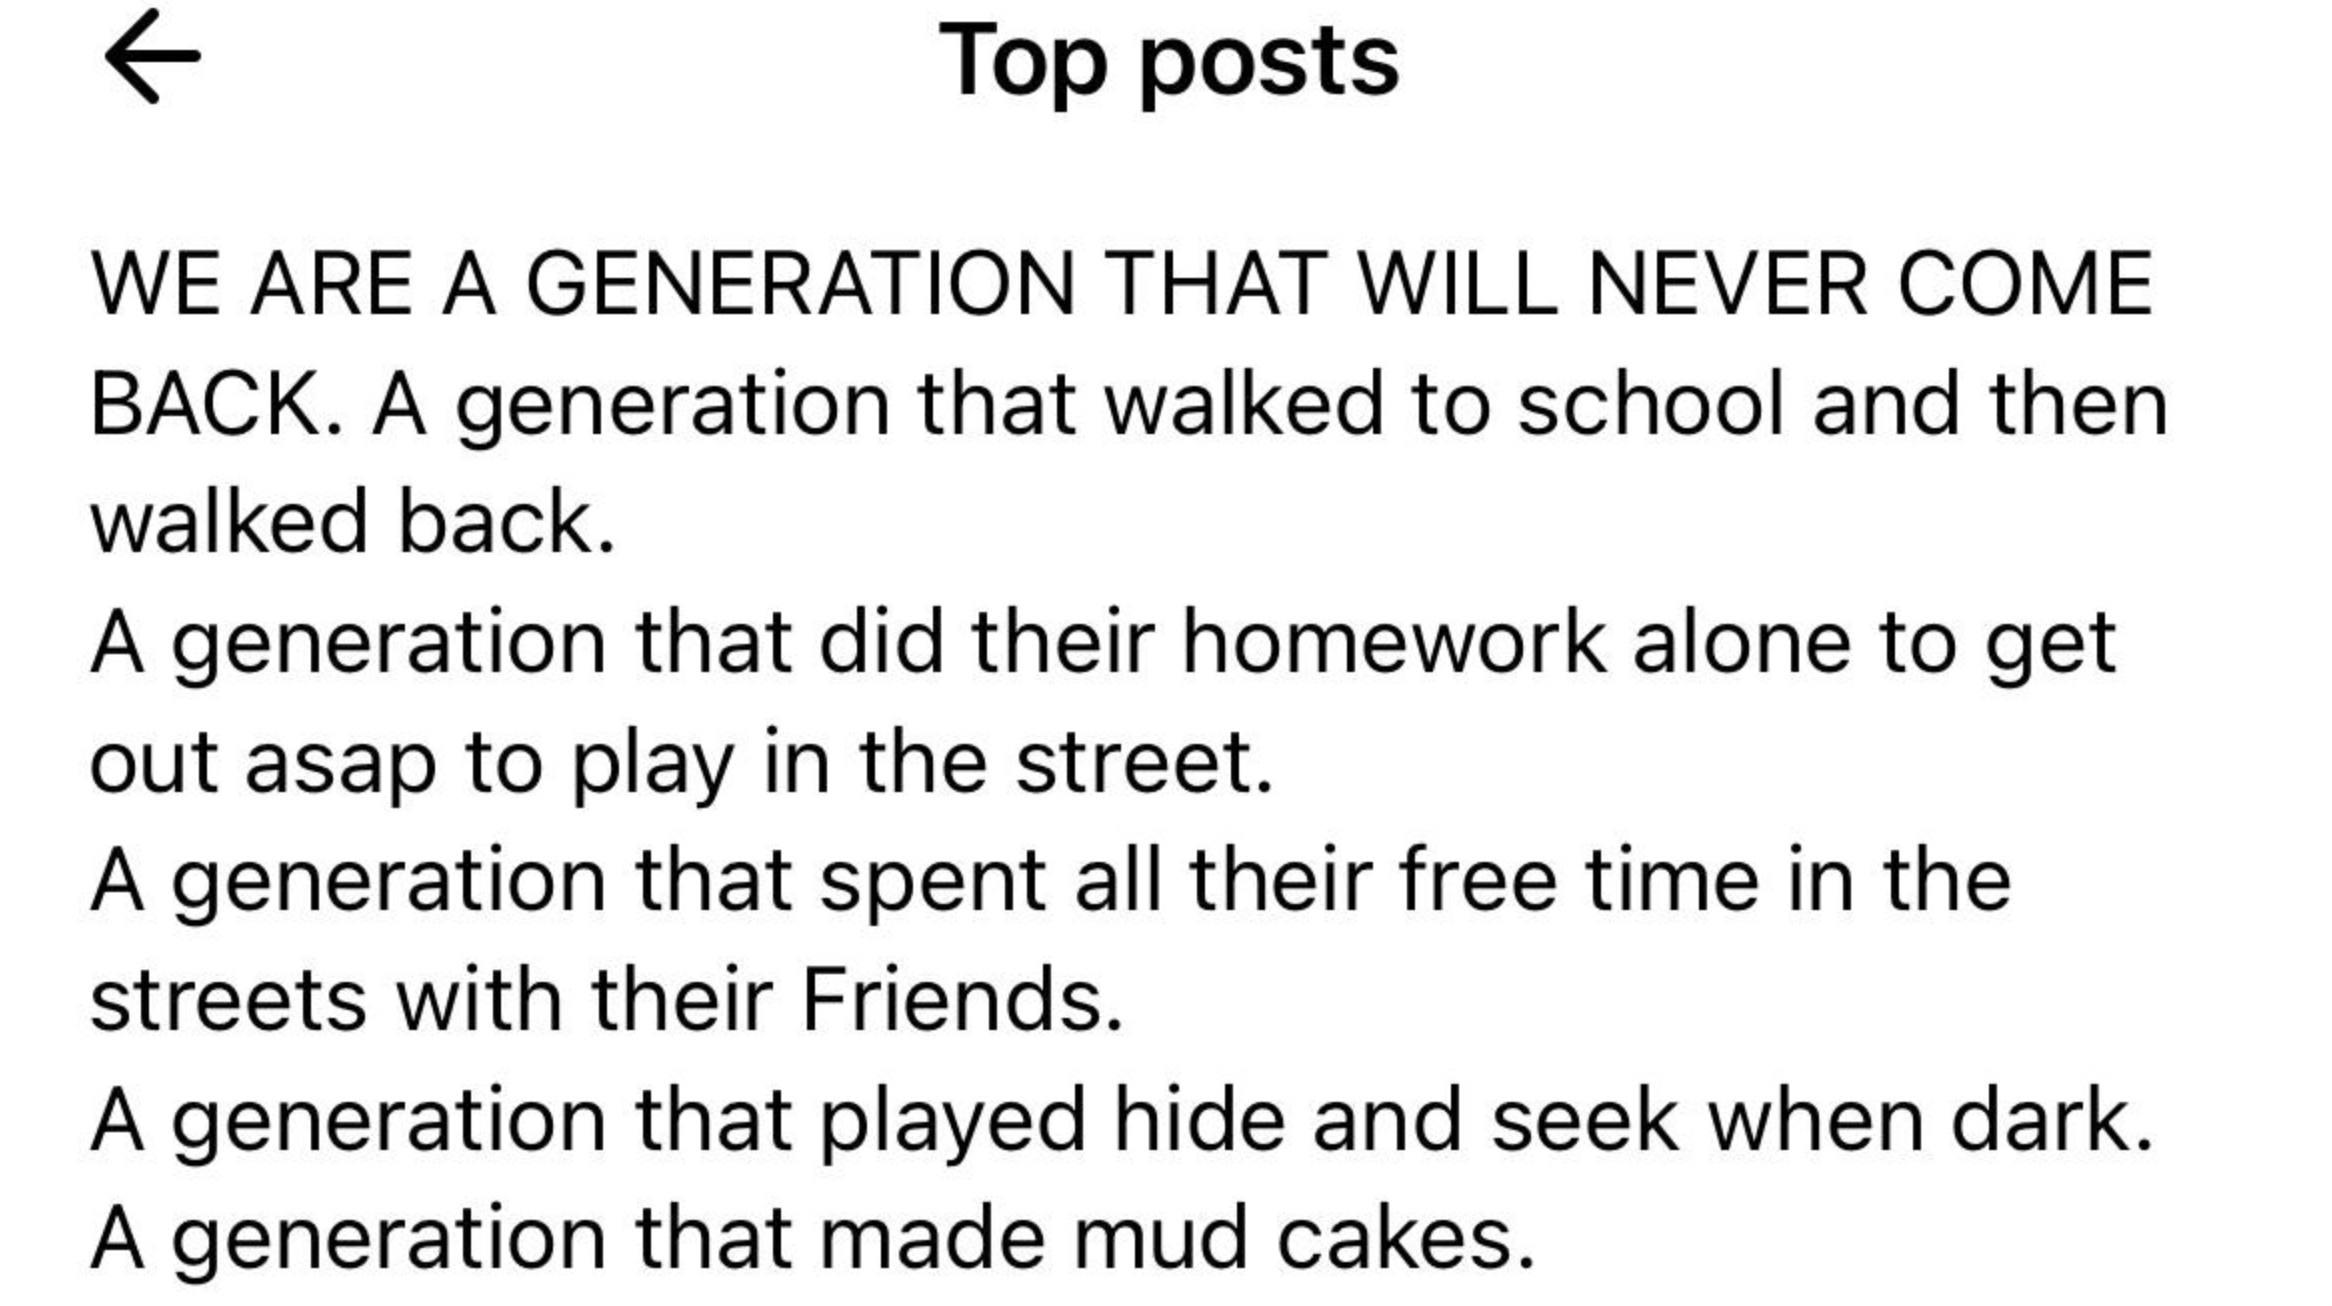 number - Top posts We Are A Generation That Will Never Come Back. A generation that walked to school and then walked back. A generation that did their homework alone to get out asap to play in the street. A generation that spent all their free time in the